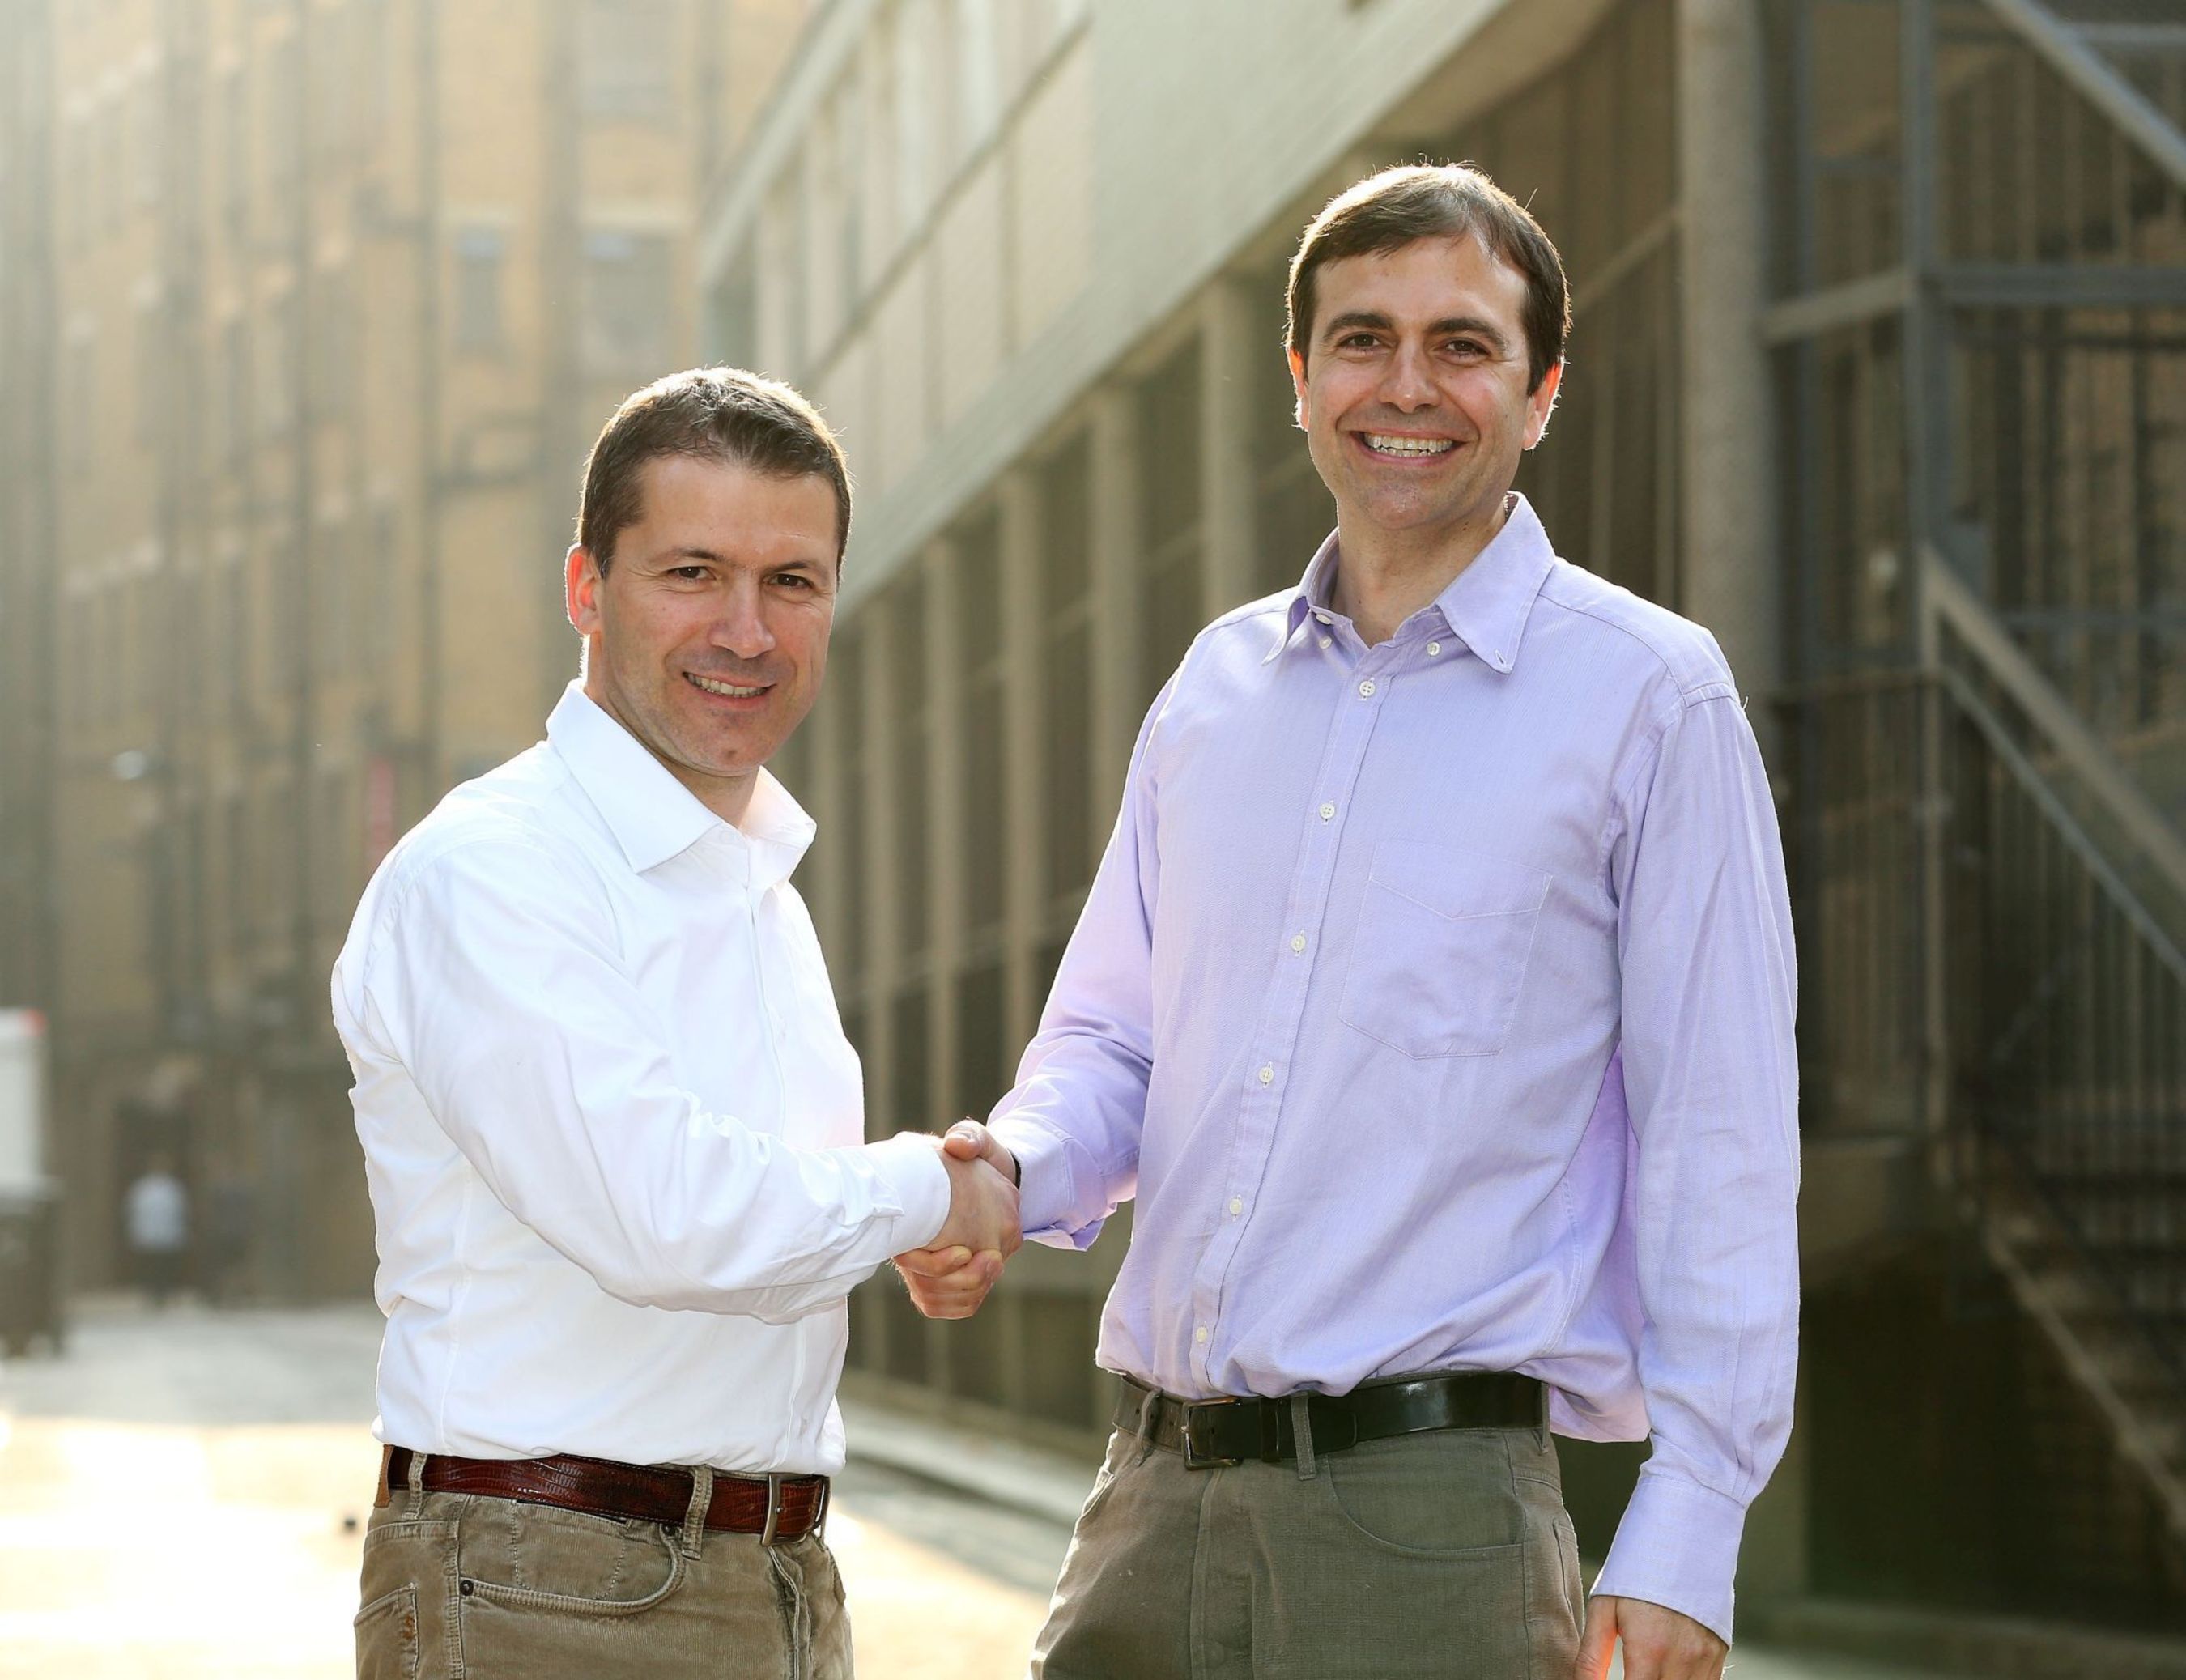 Alberto Spinelli (L), Director of Digital Services at Canon Europe and Nicholas Babaian (R), CEO and co-founder of Lifecake (PRNewsFoto/Canon Europe)